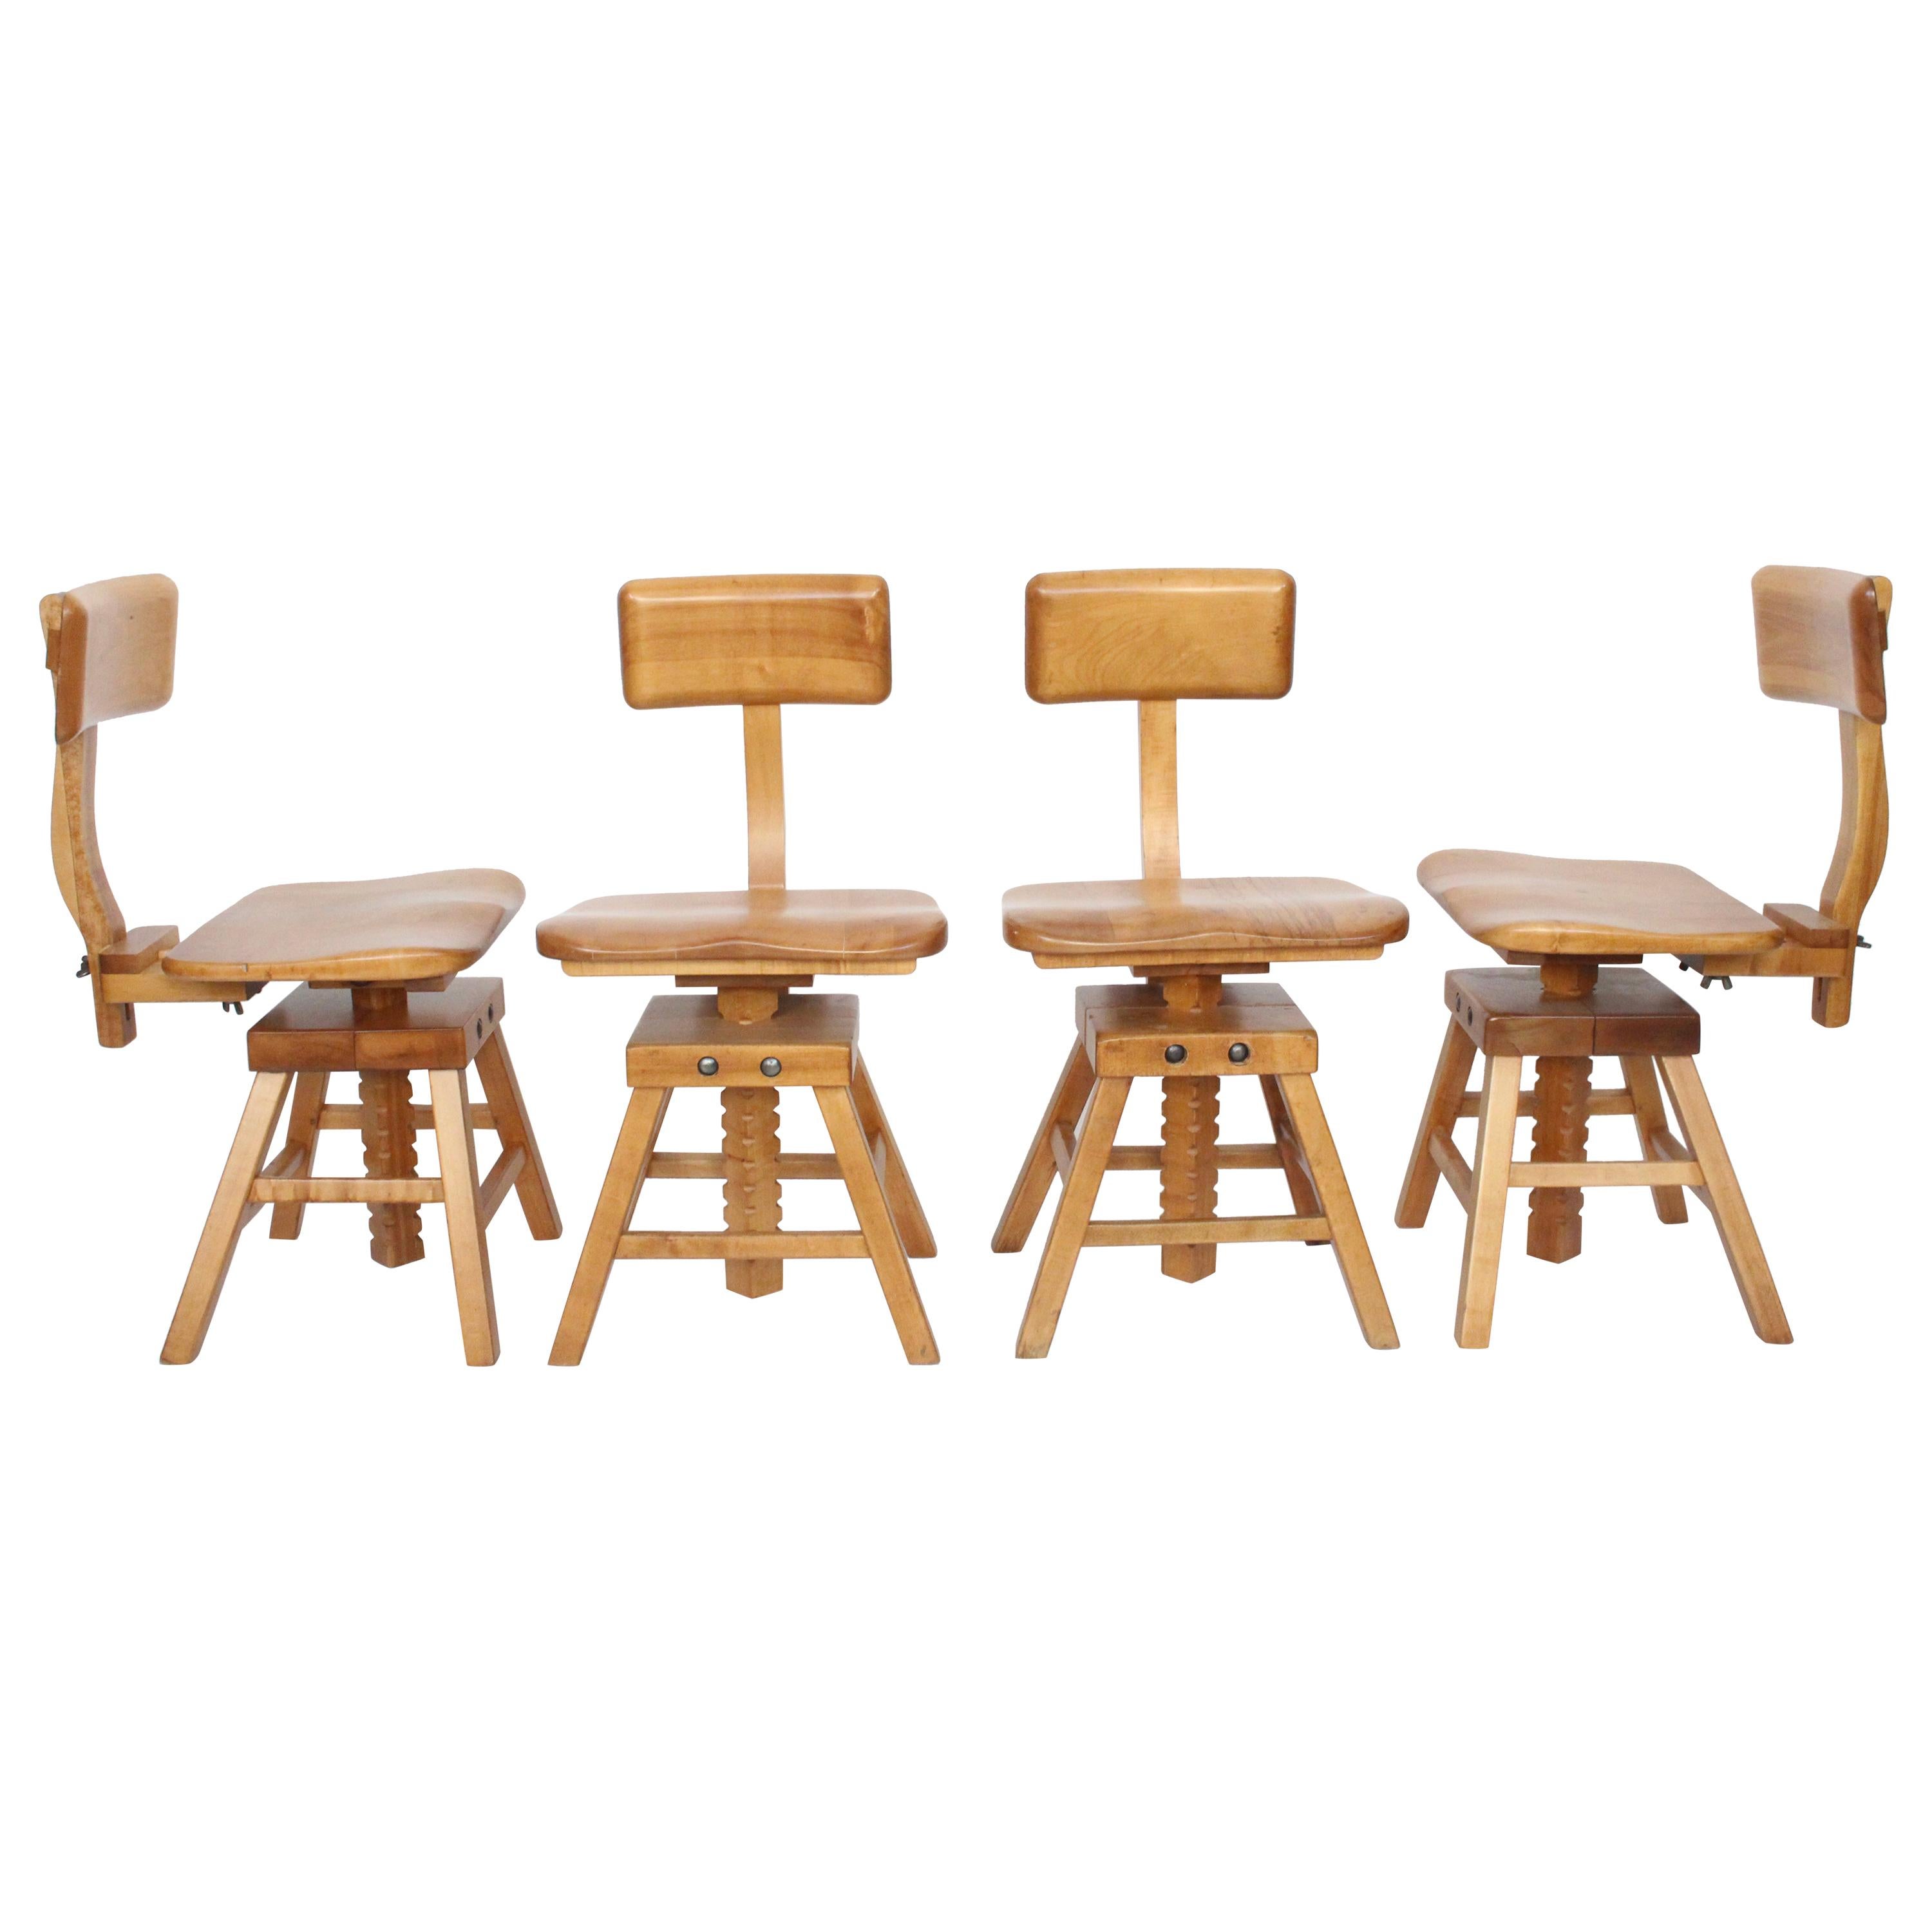 Set of Four Edward L. Koenig Adjustable Architects Chairs in Maple, circa 1940